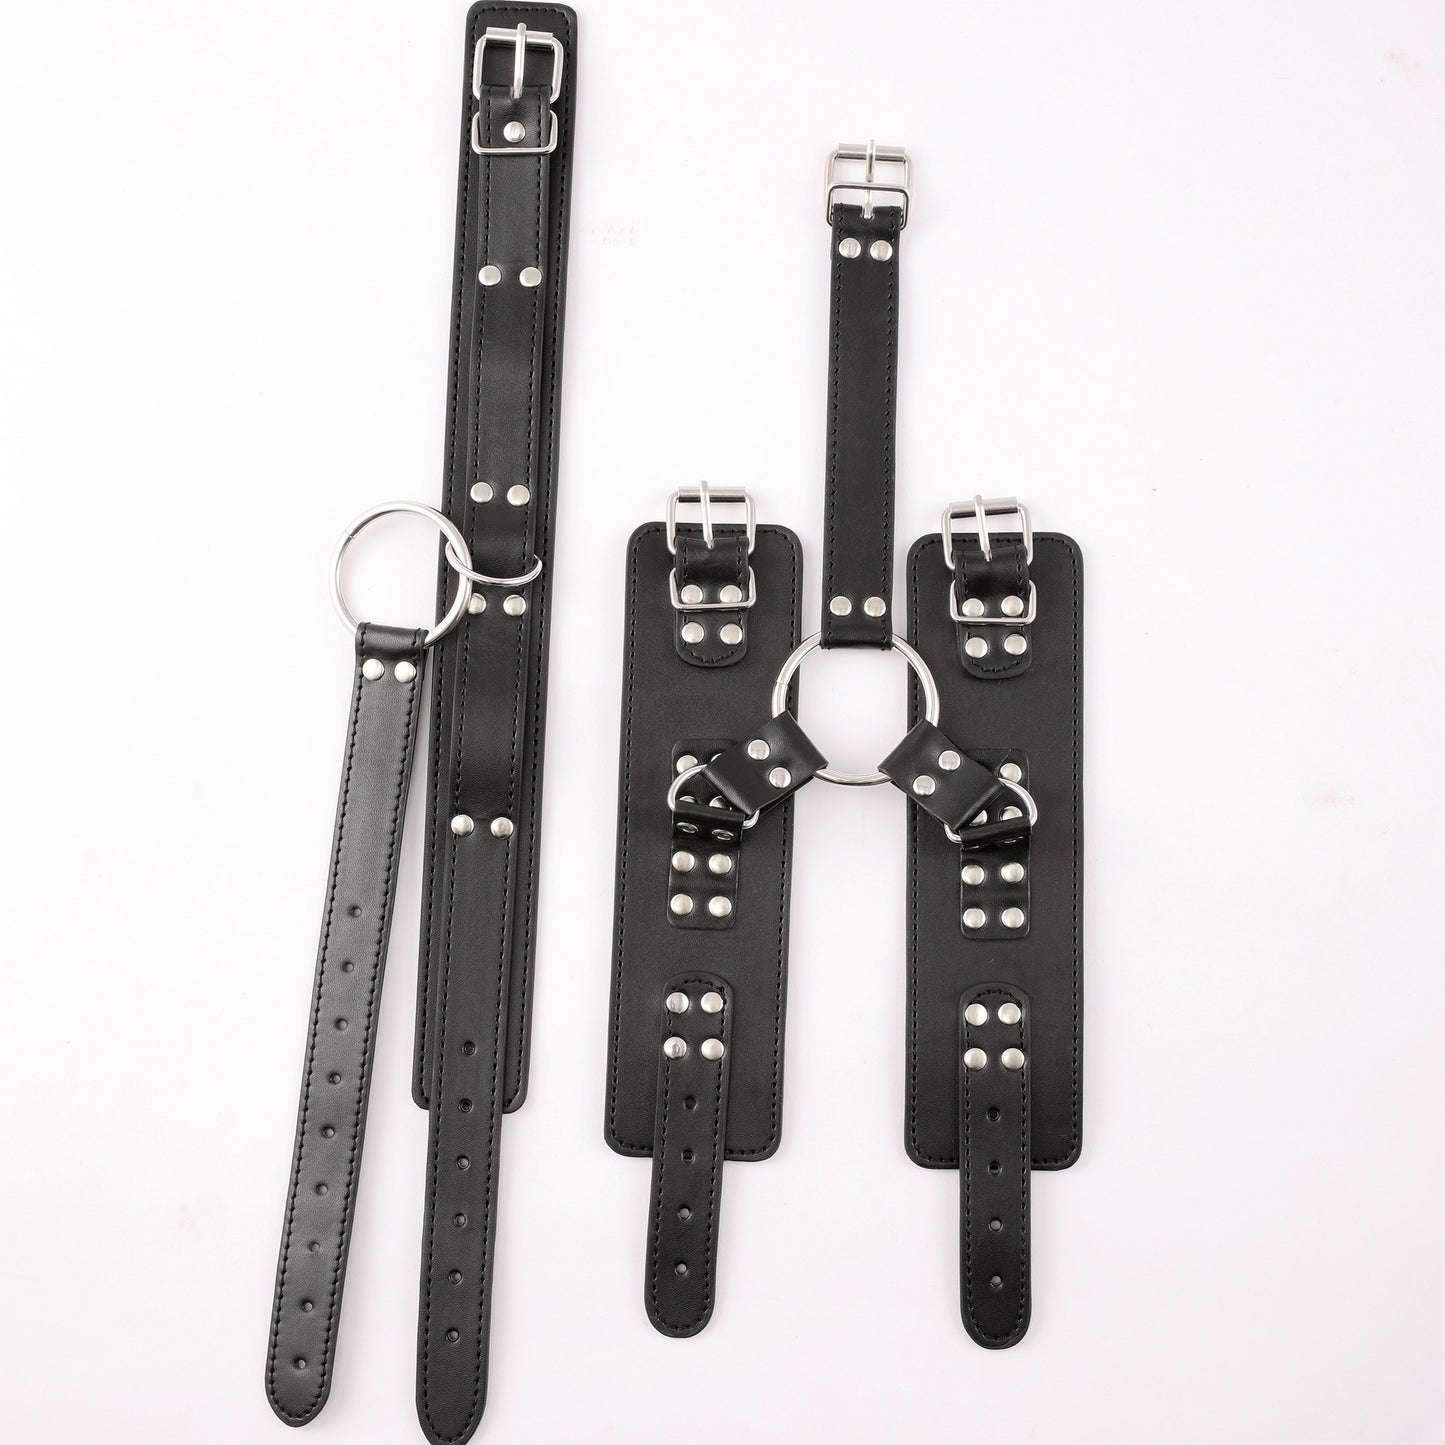 Faux Leather Wrists to Collar Harness Restraint